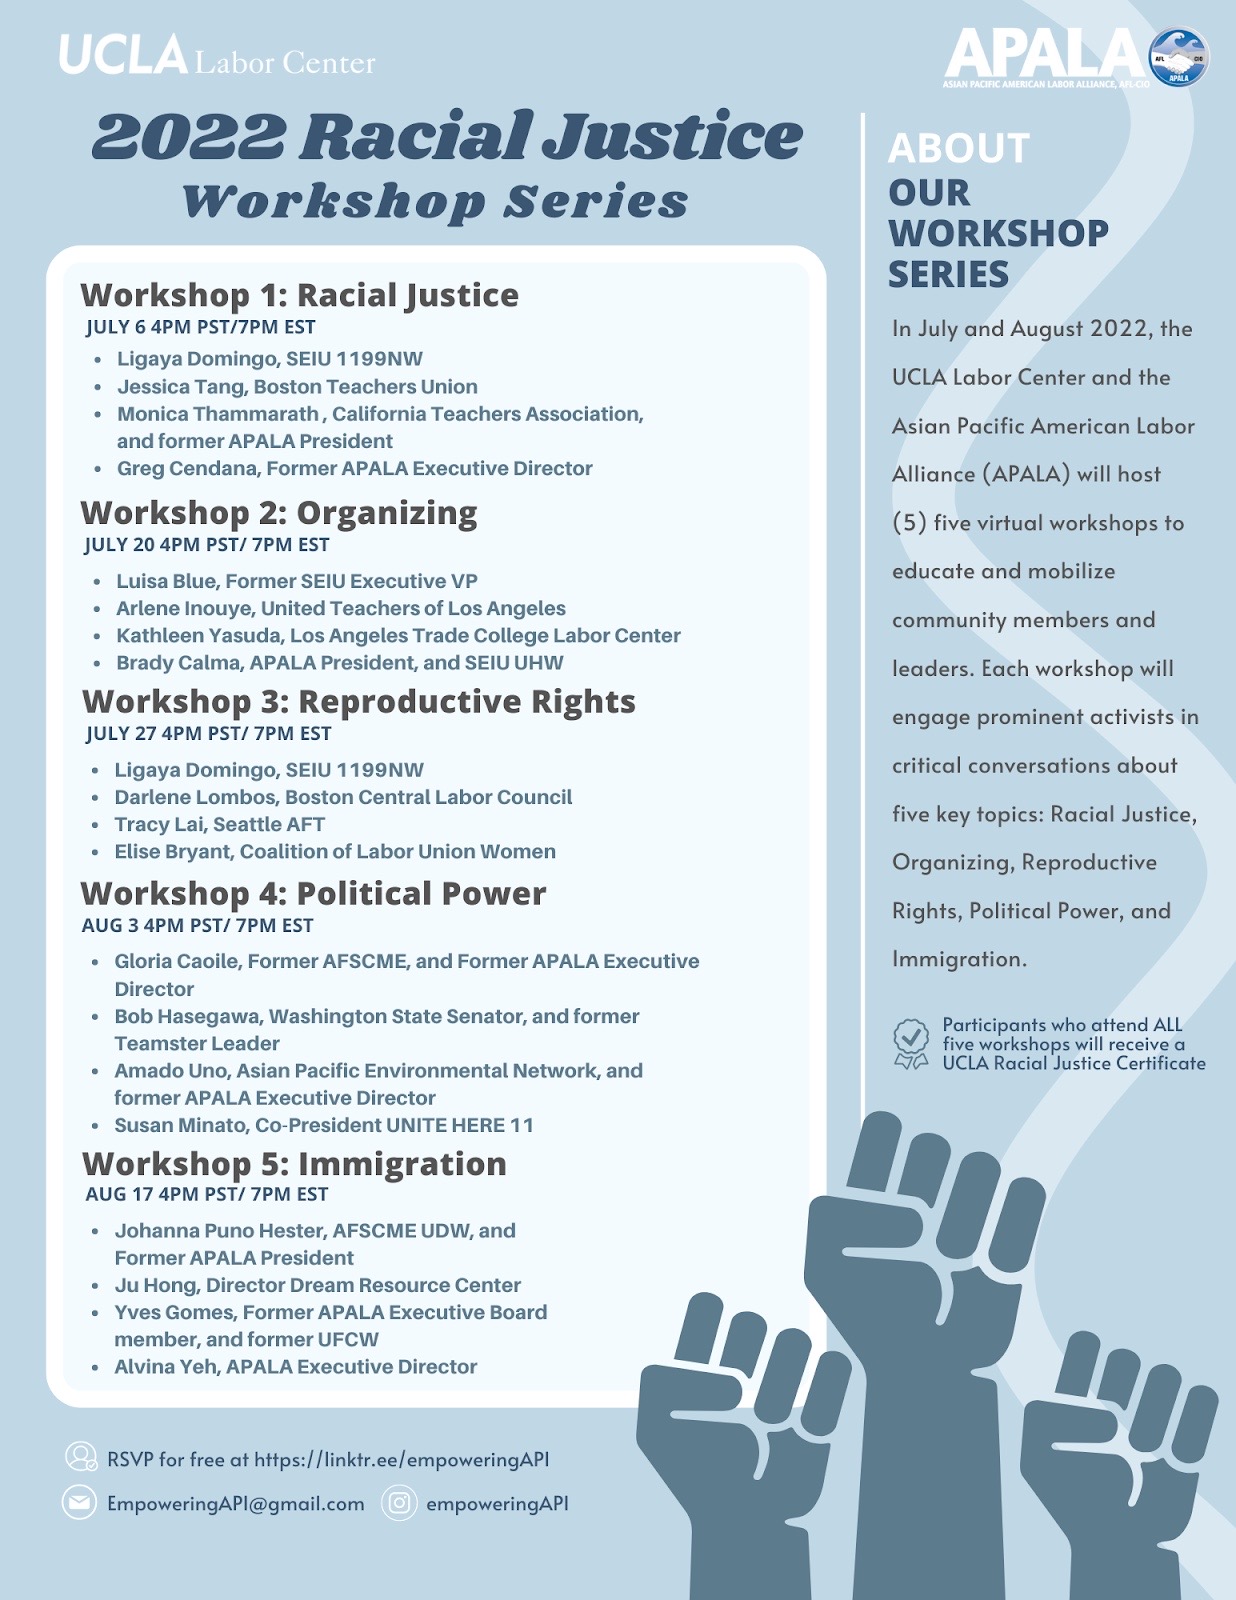 Light and dark blue image highlighting the different workshops in UCLA and APALA's 2022 Racial Justice Workshop Series.